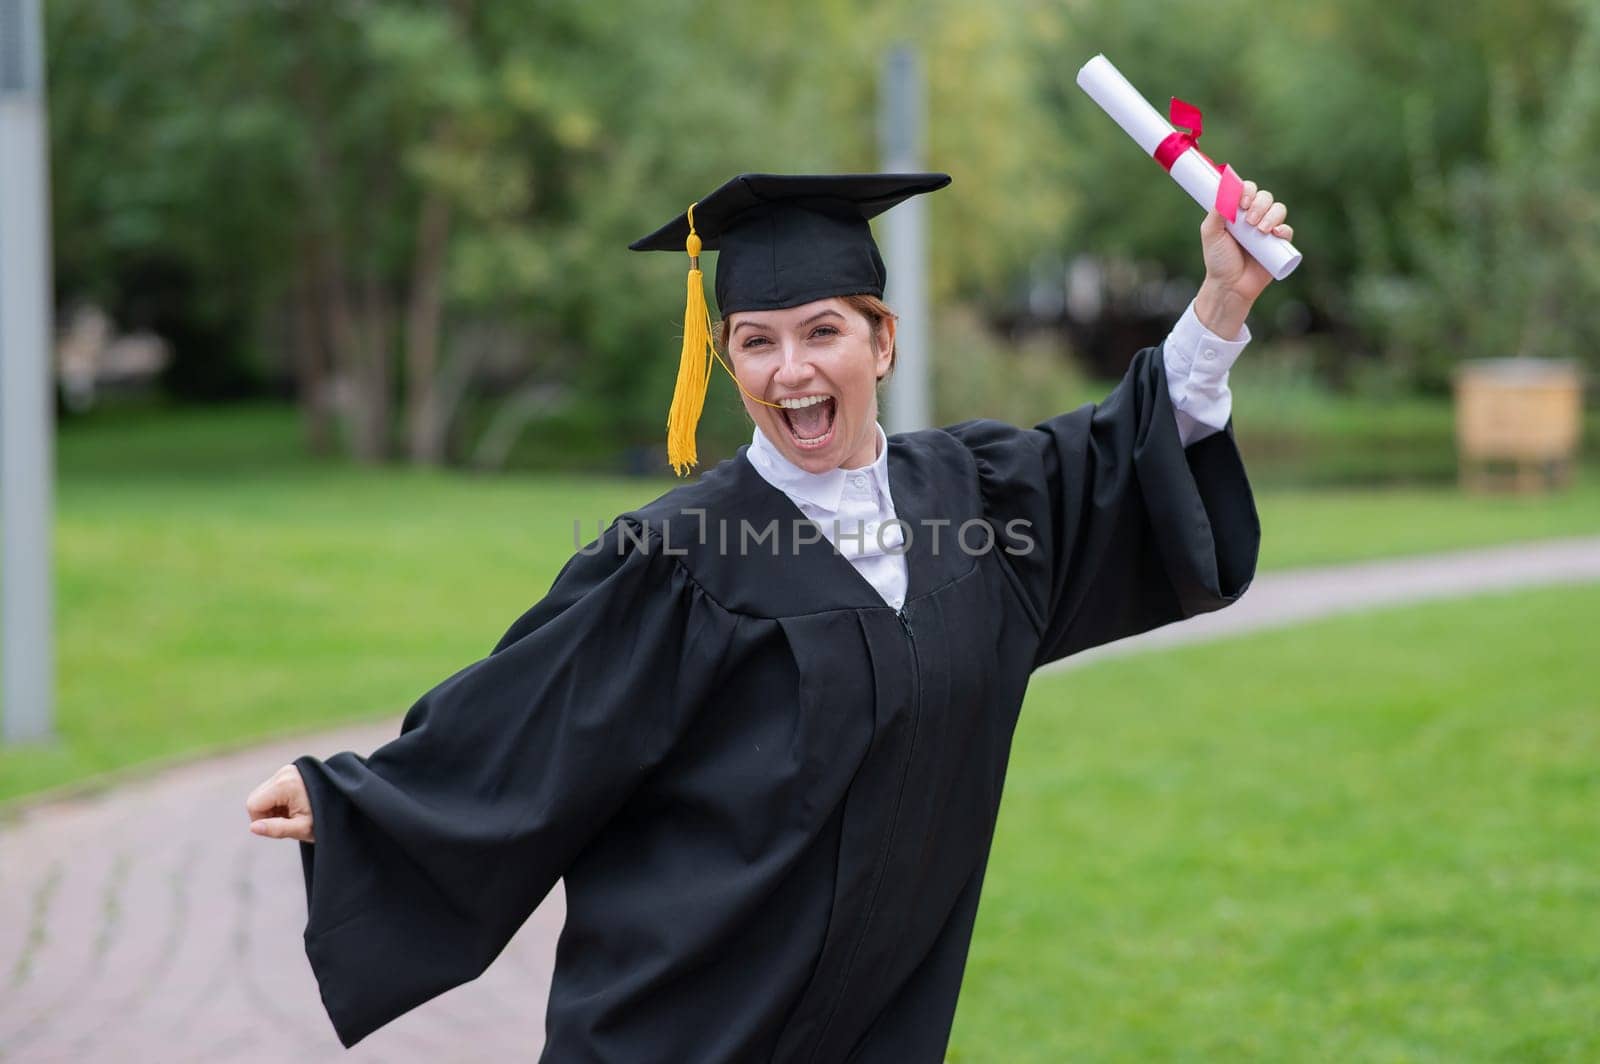 Caucasian woman in graduate gown dancing for joy outdoors. by mrwed54